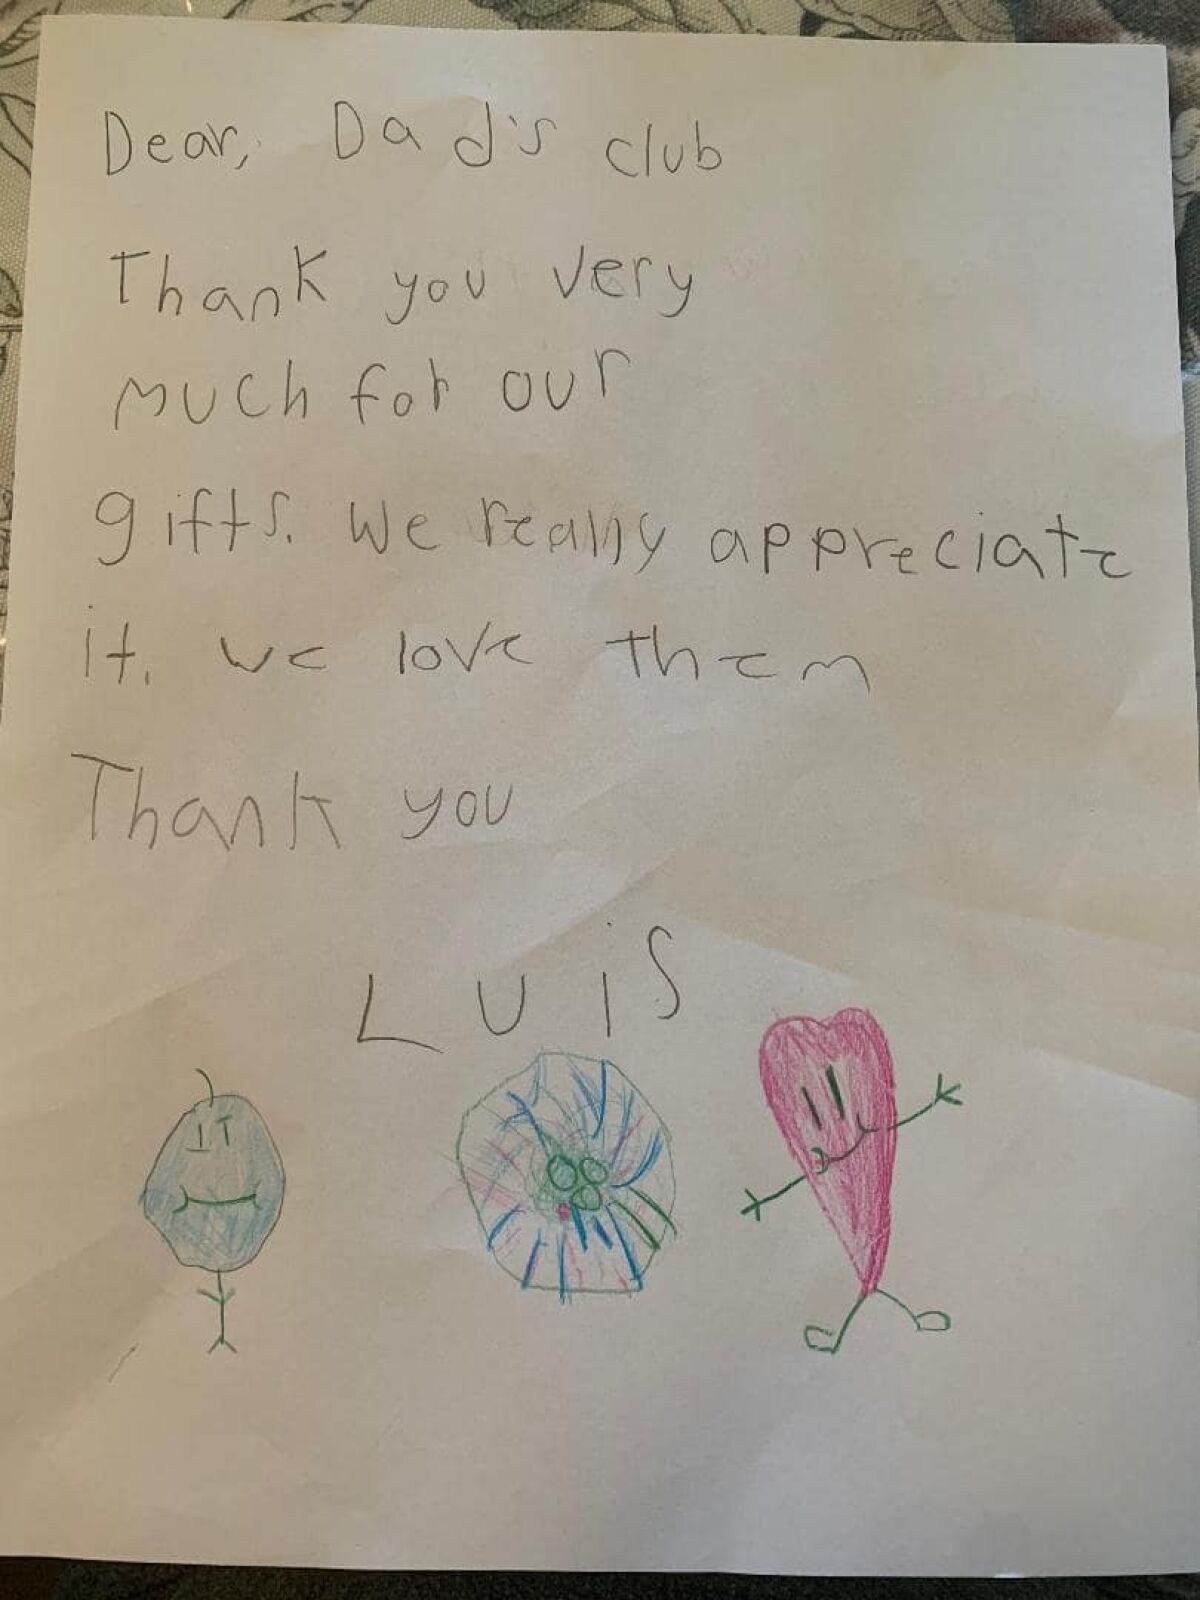 Relief fund volunteers have been receiving thank you letters from local children.